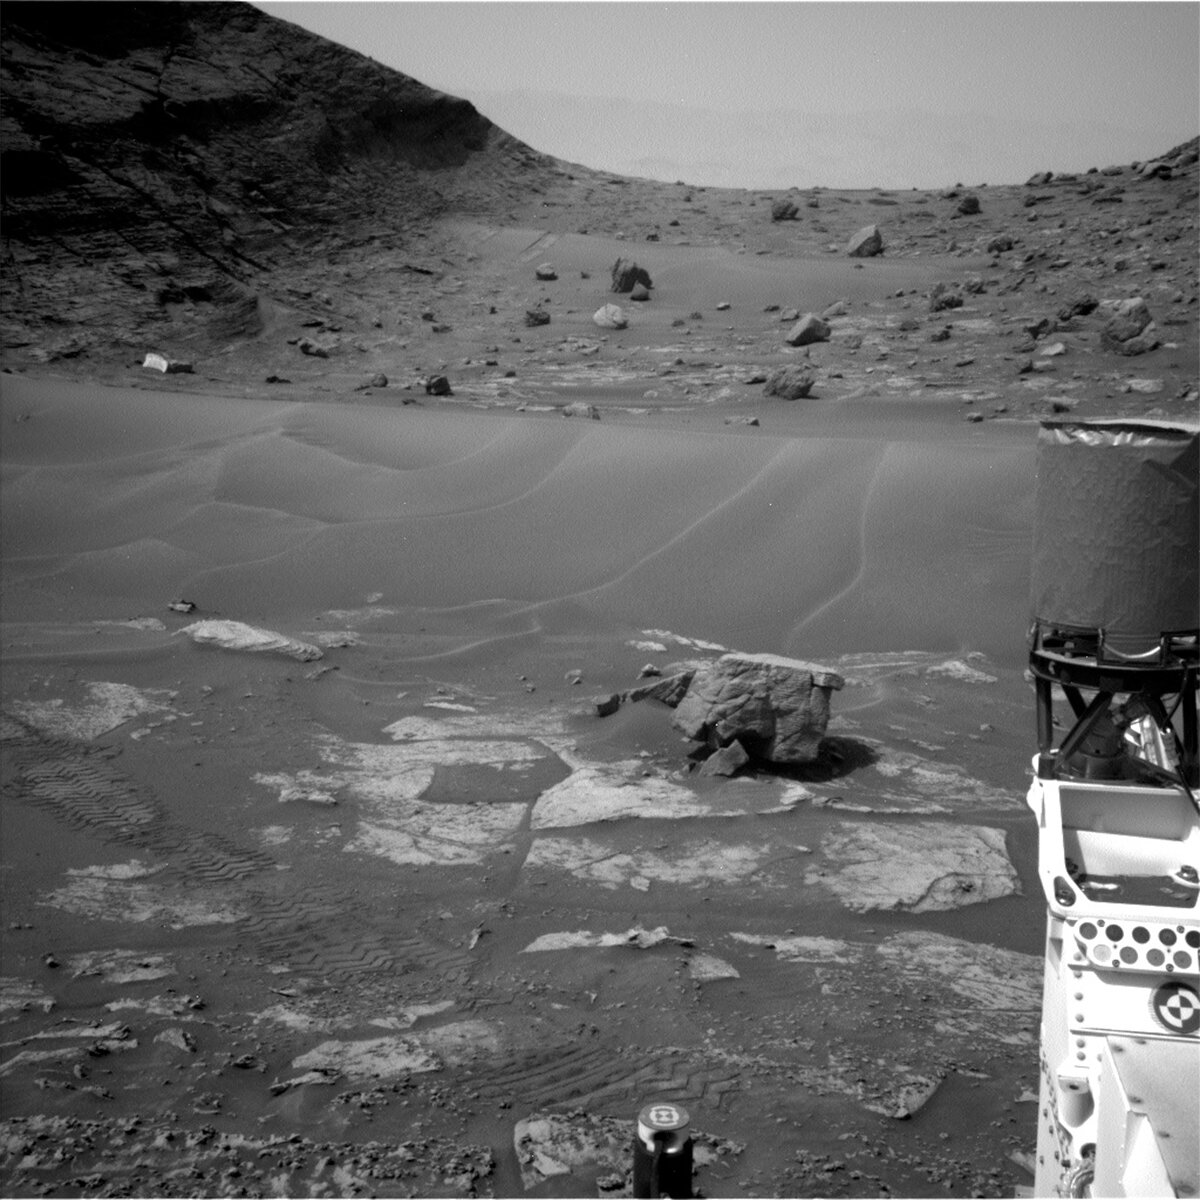 This image looking at the TARS was taken by Left Navigation Camera onboard NASA's Mars rover Curiosity on Sol 3570.